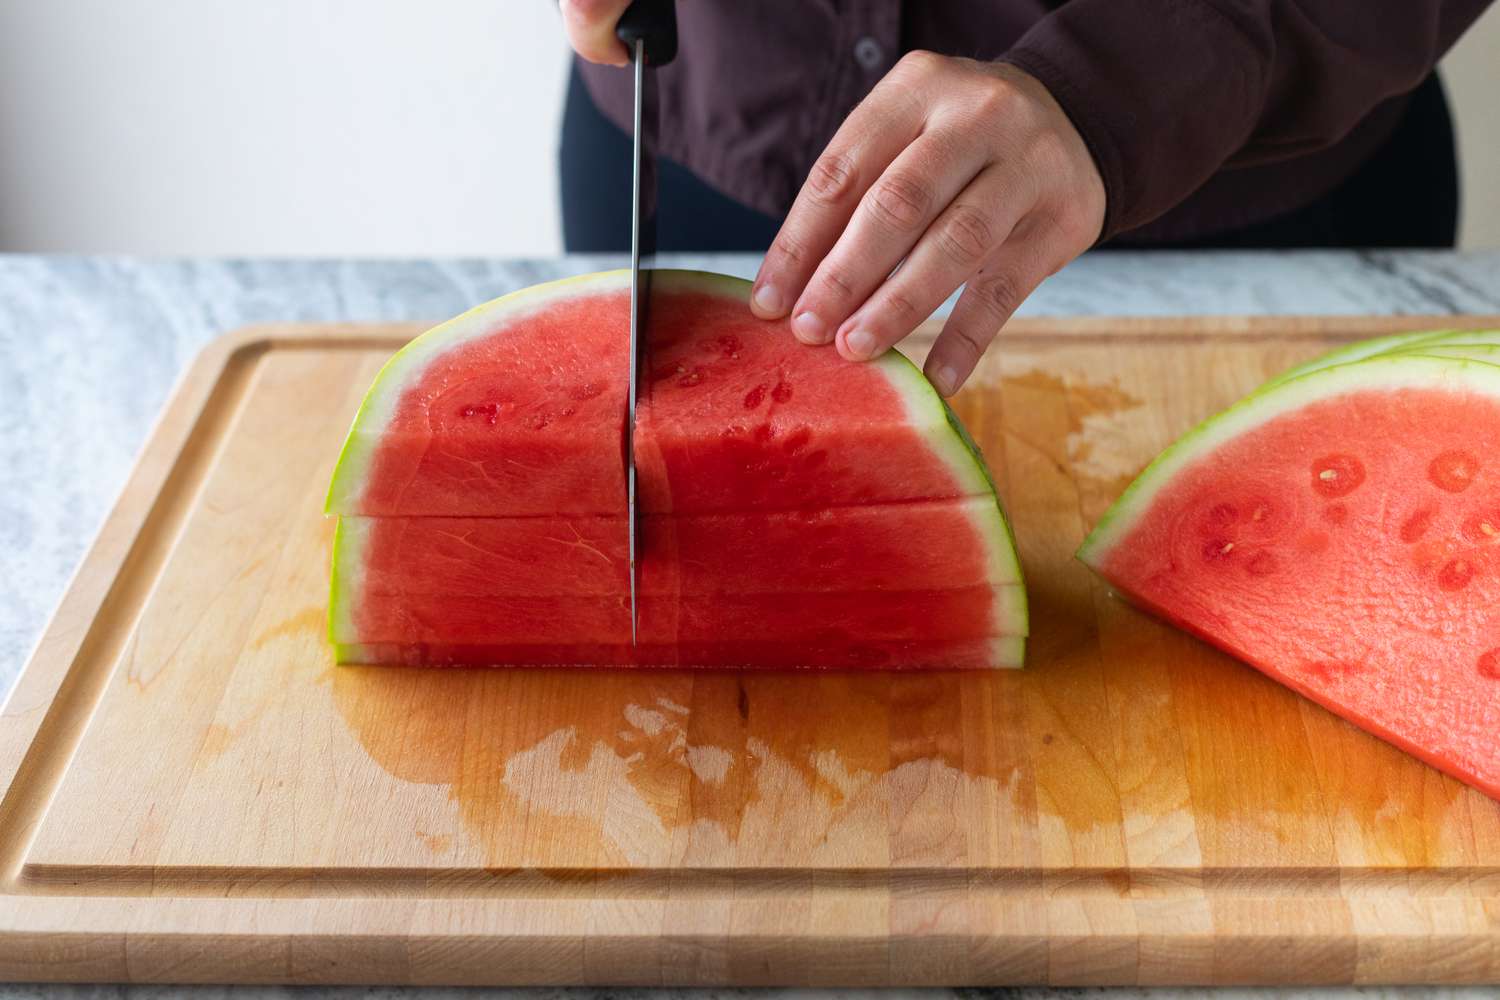 How to Cut Watermelon